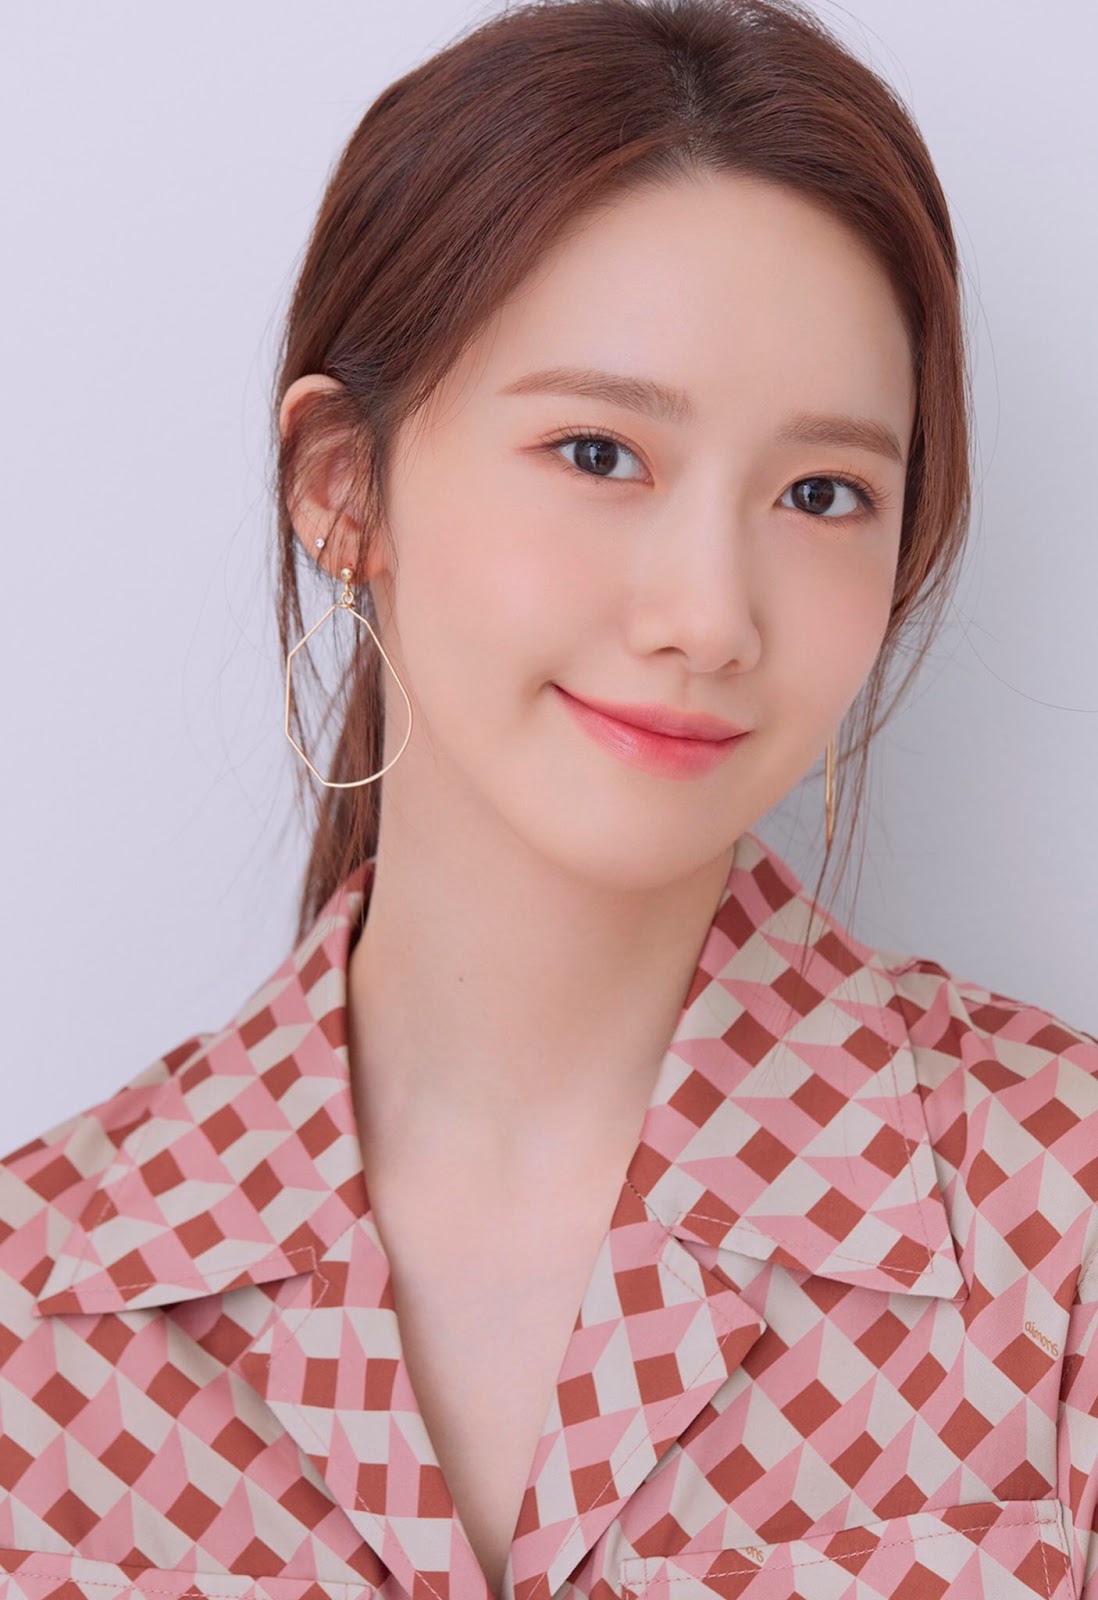 Snsd Yoona Is The Honorary Judge For The 19th Mise En Scène Short Film